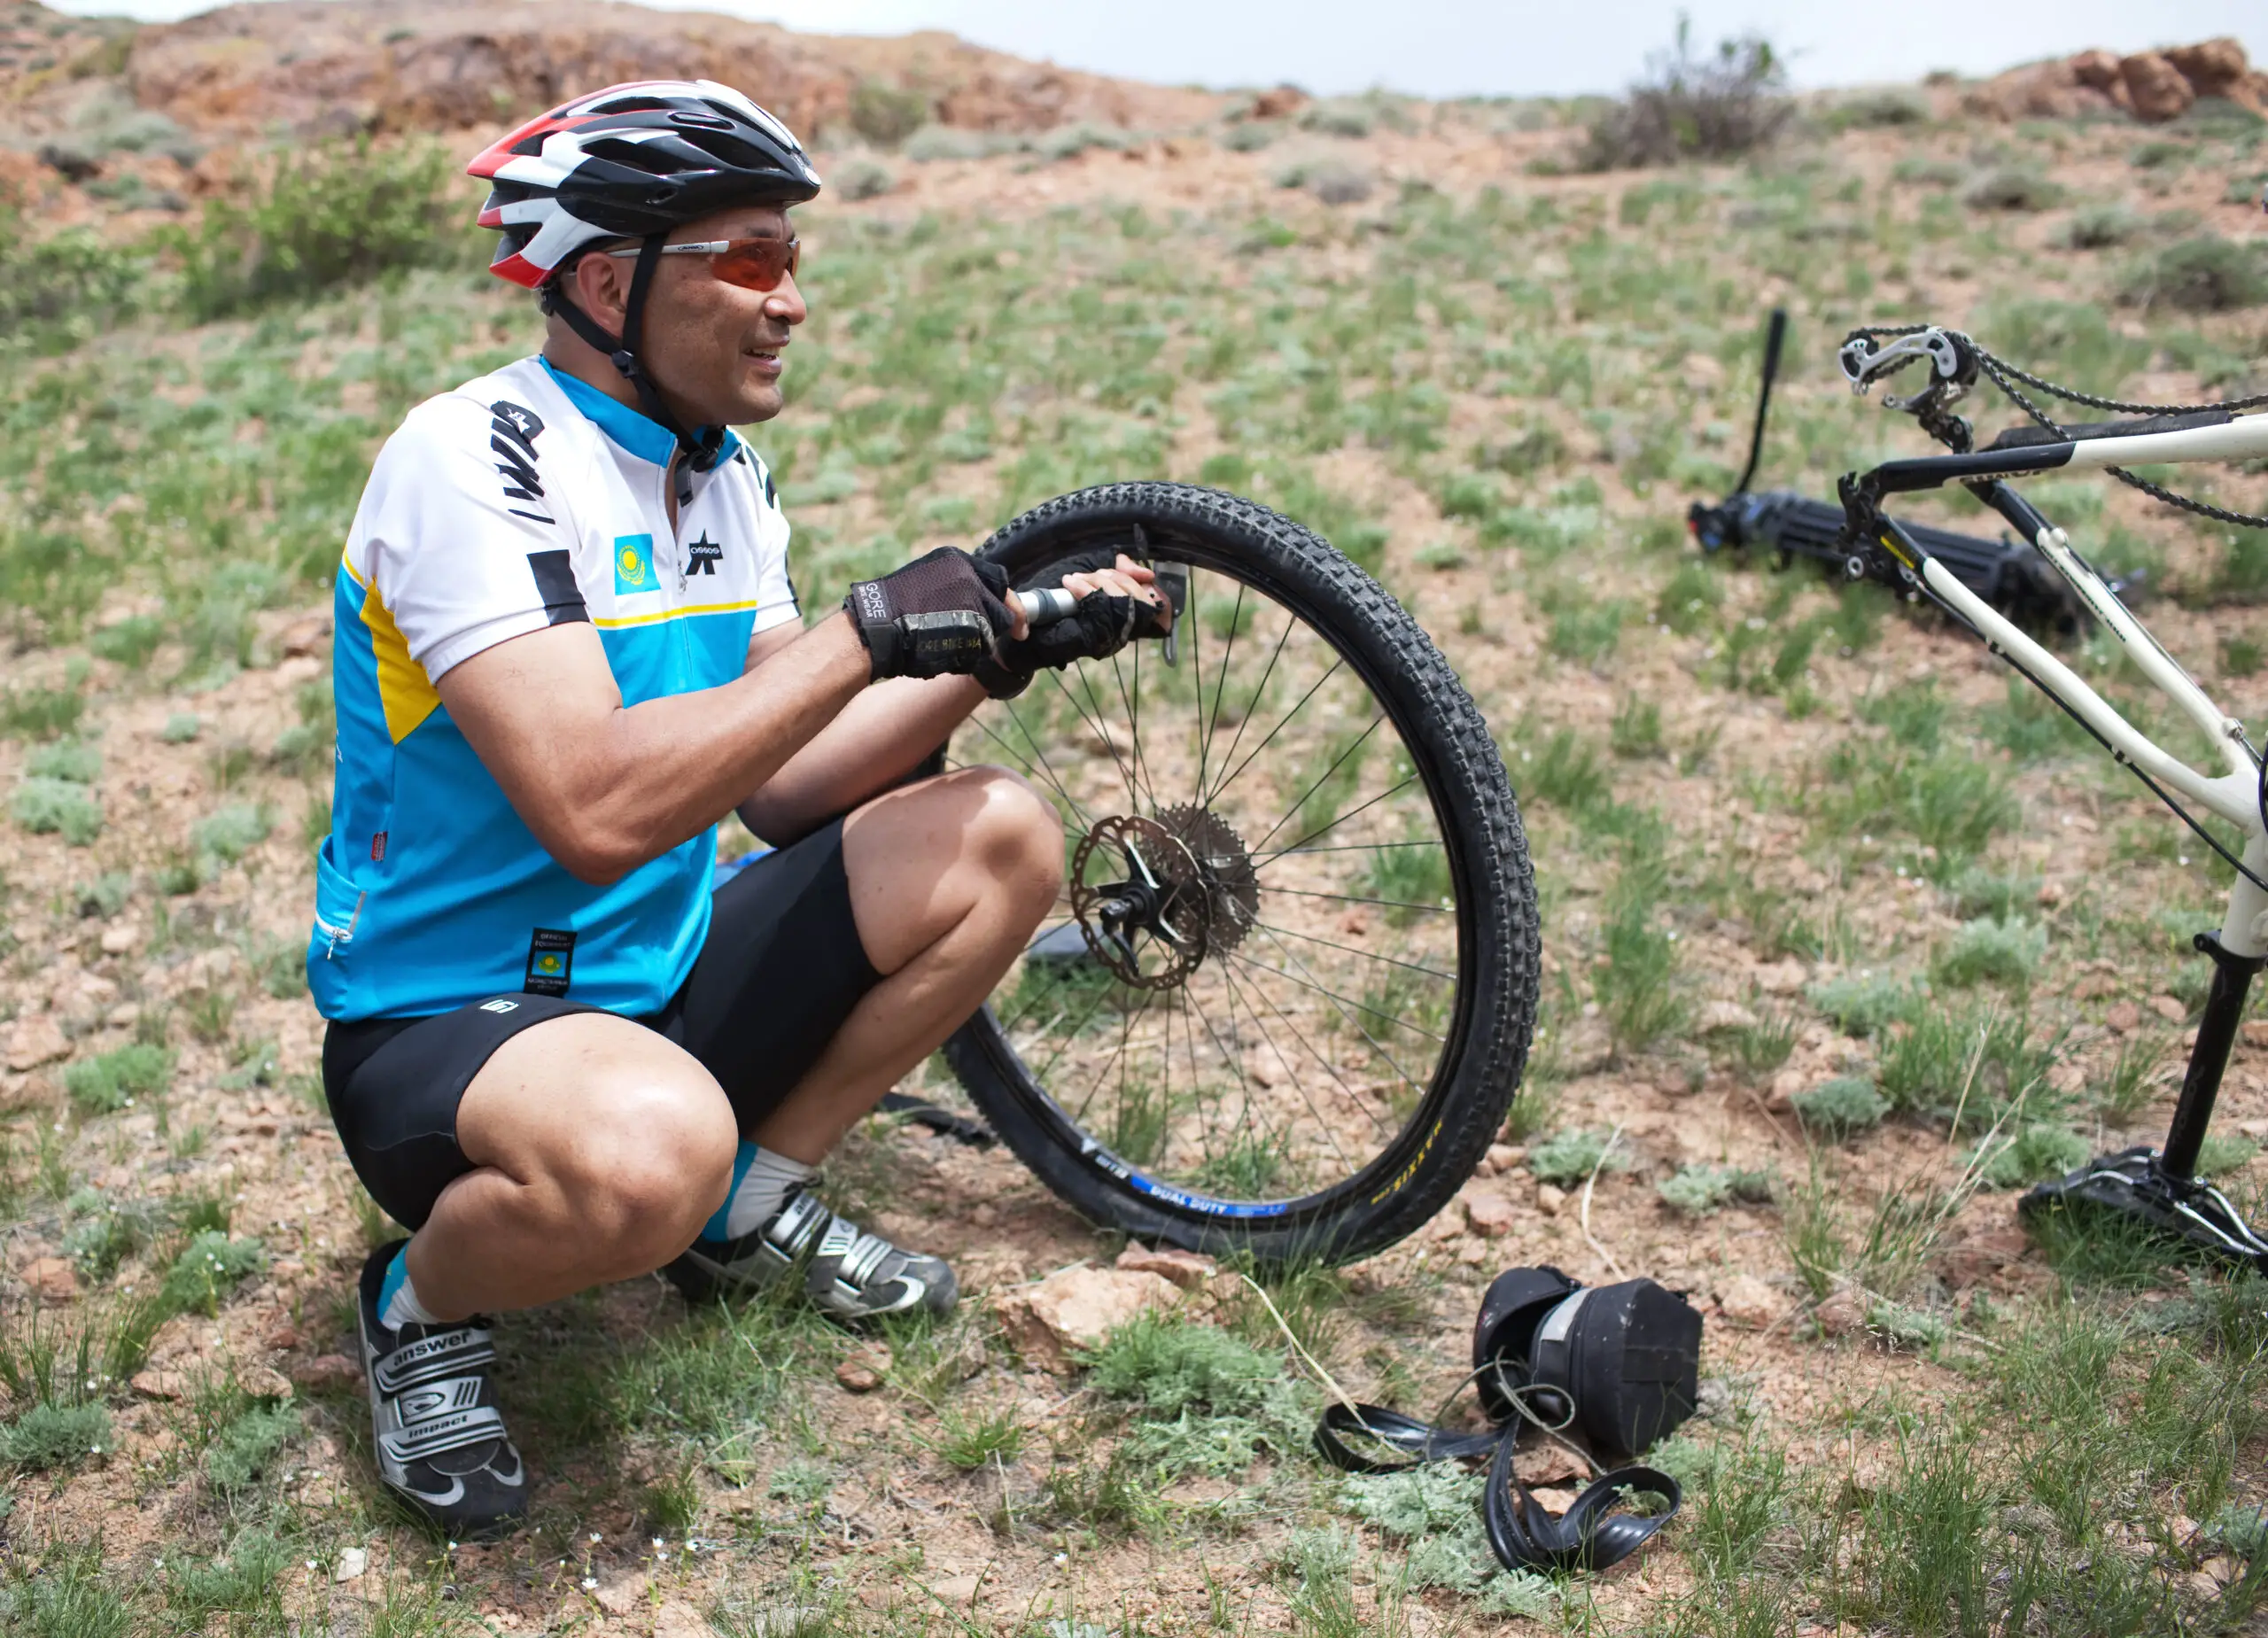 Biker changing a flat tire on desert mountain bike competition